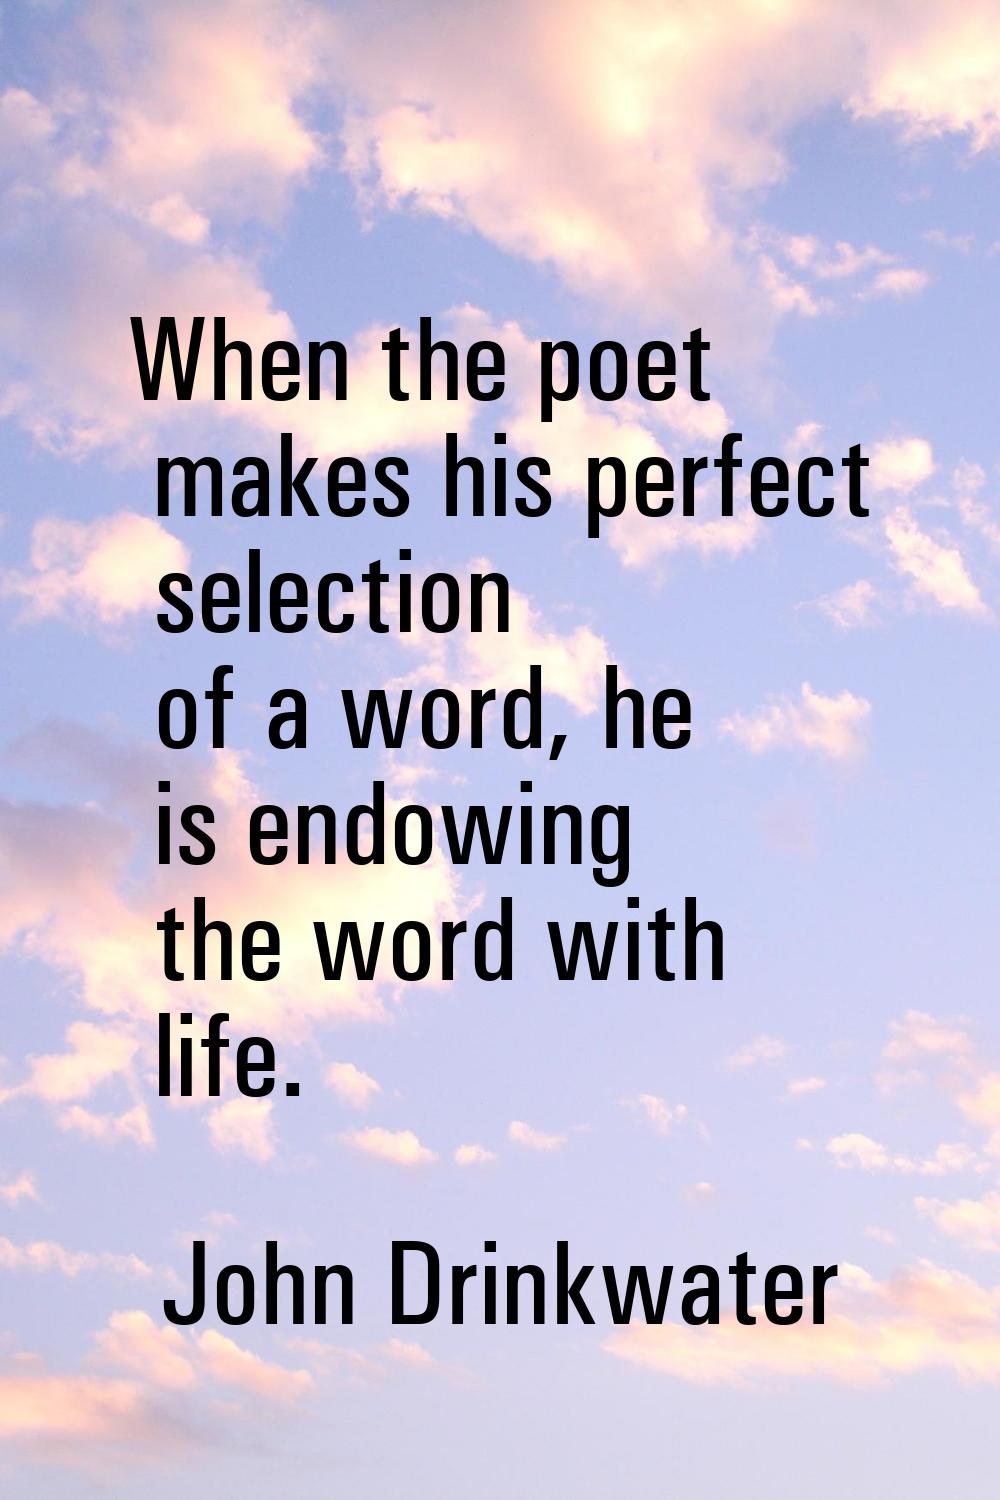 When the poet makes his perfect selection of a word, he is endowing the word with life.